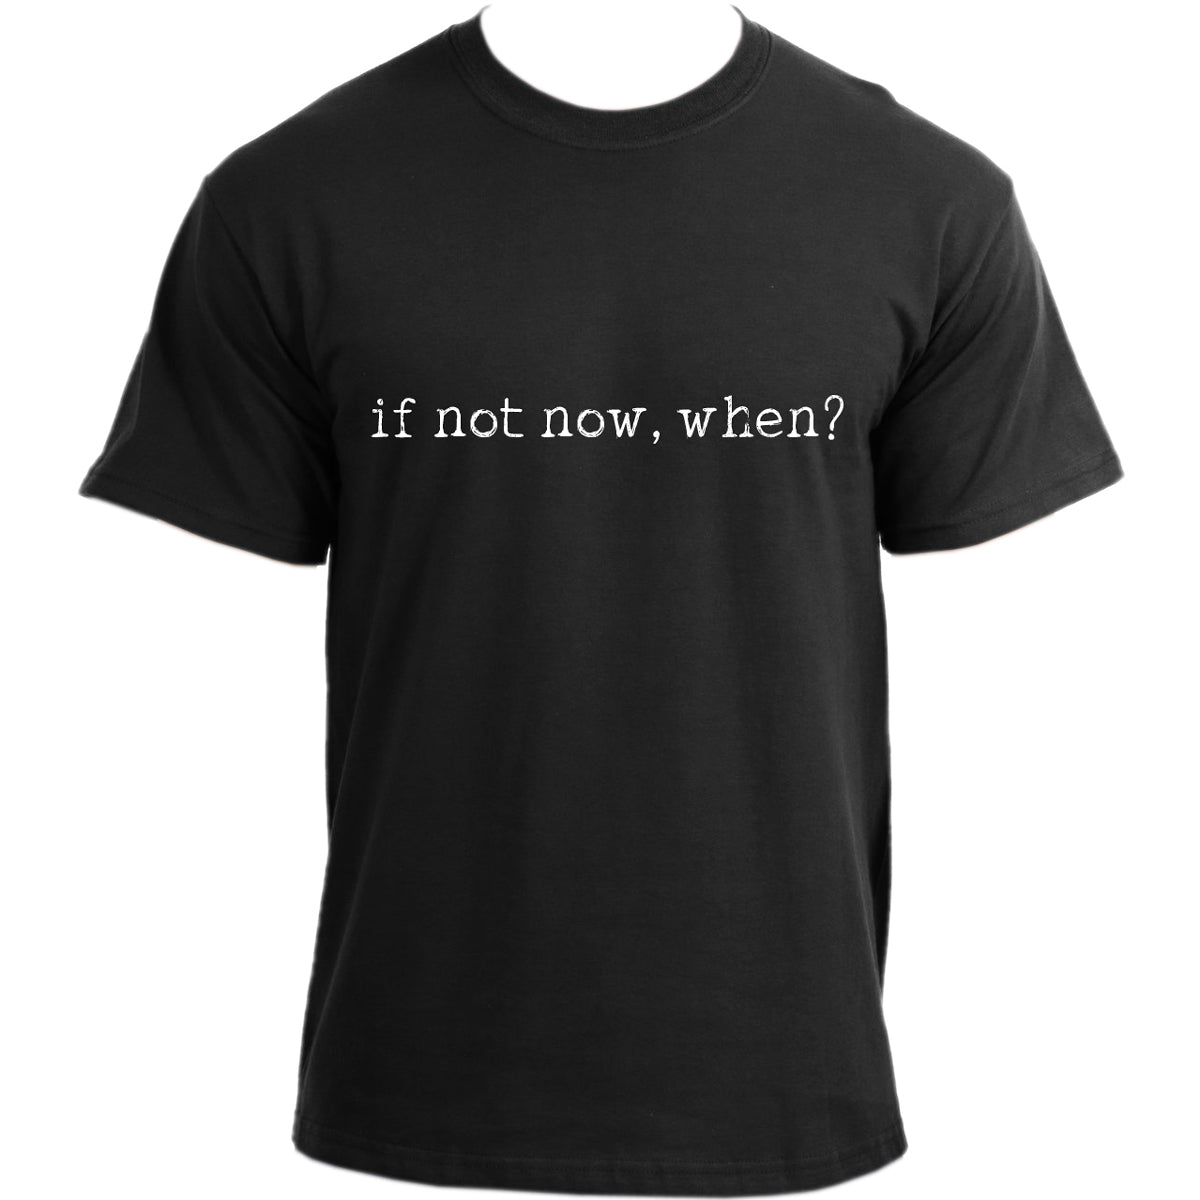 If not now, when? I Motivational quote t-shirt I Productivity Mindset T Shirt